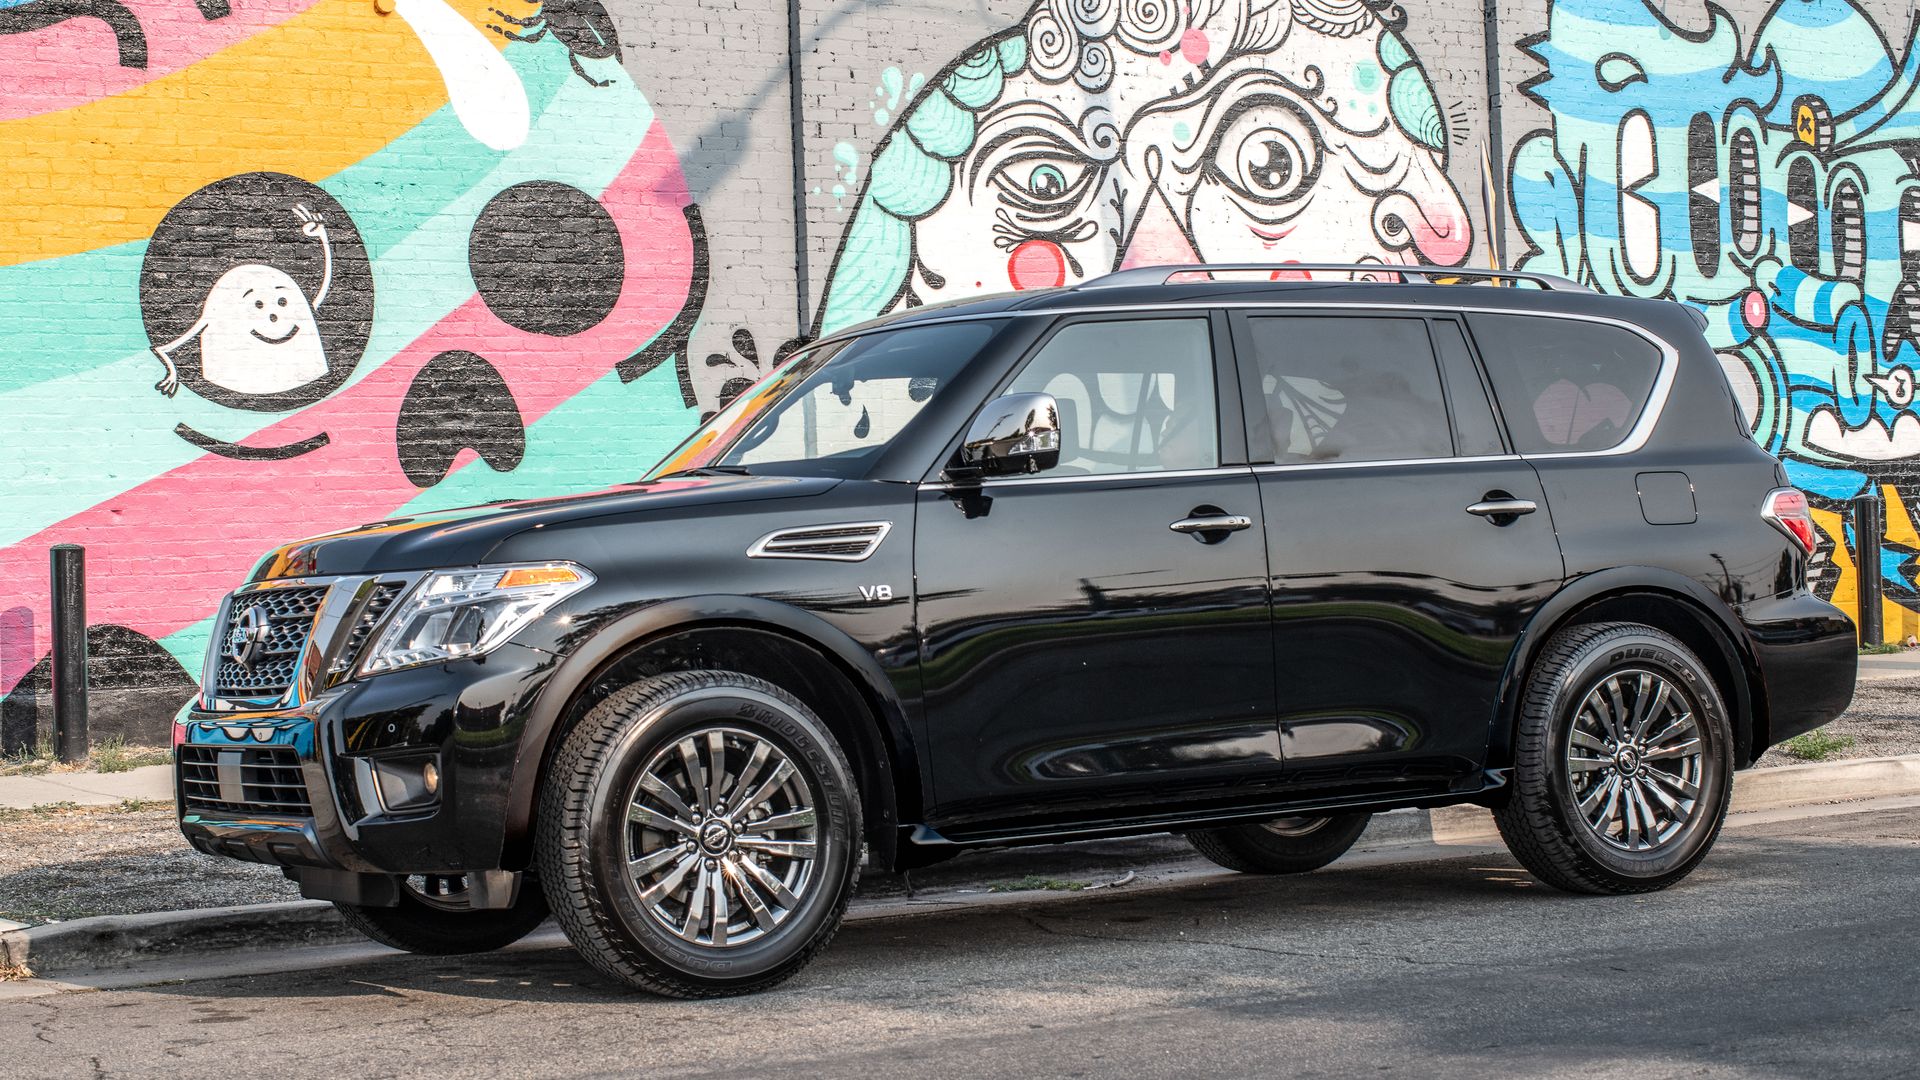 photo of 2019 Nissan Armada SUV in front of a mural